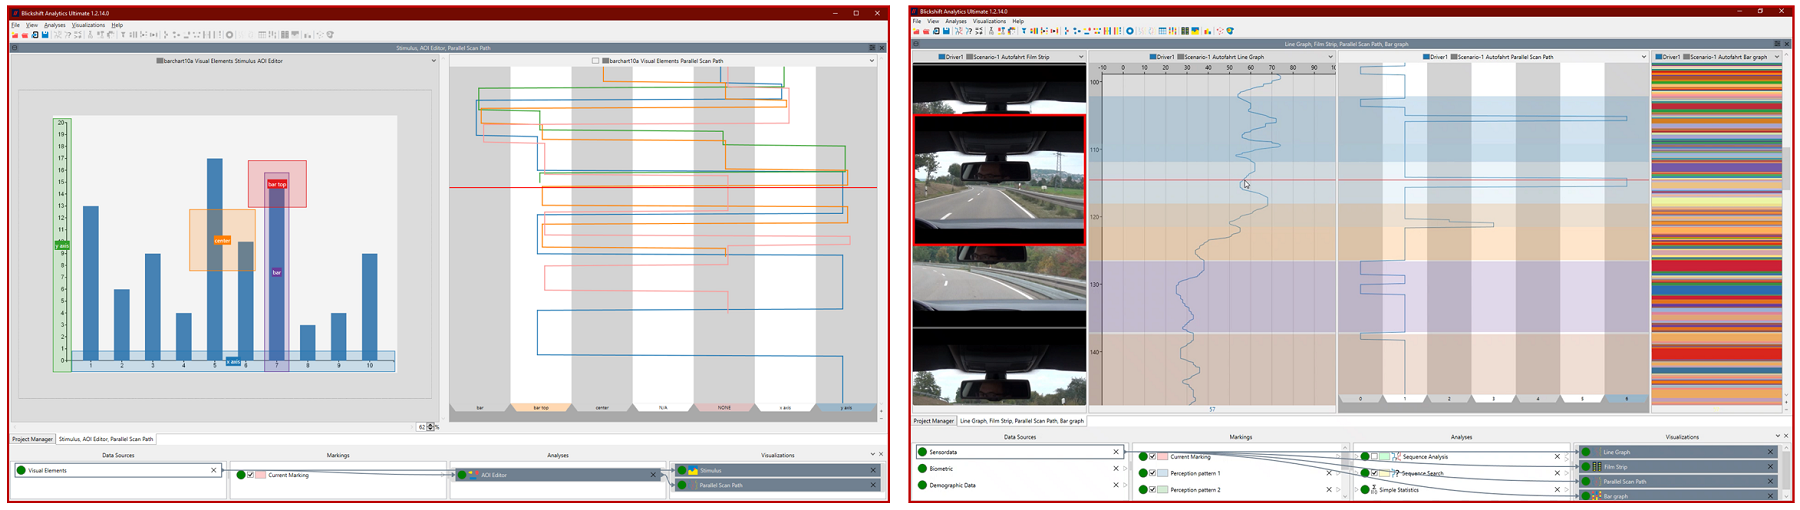 Originally, Blickshift Analytics has been designed for analyzing data from desktop-based eye tracking experiments and fixed setups in automotive eye tracking experiments.